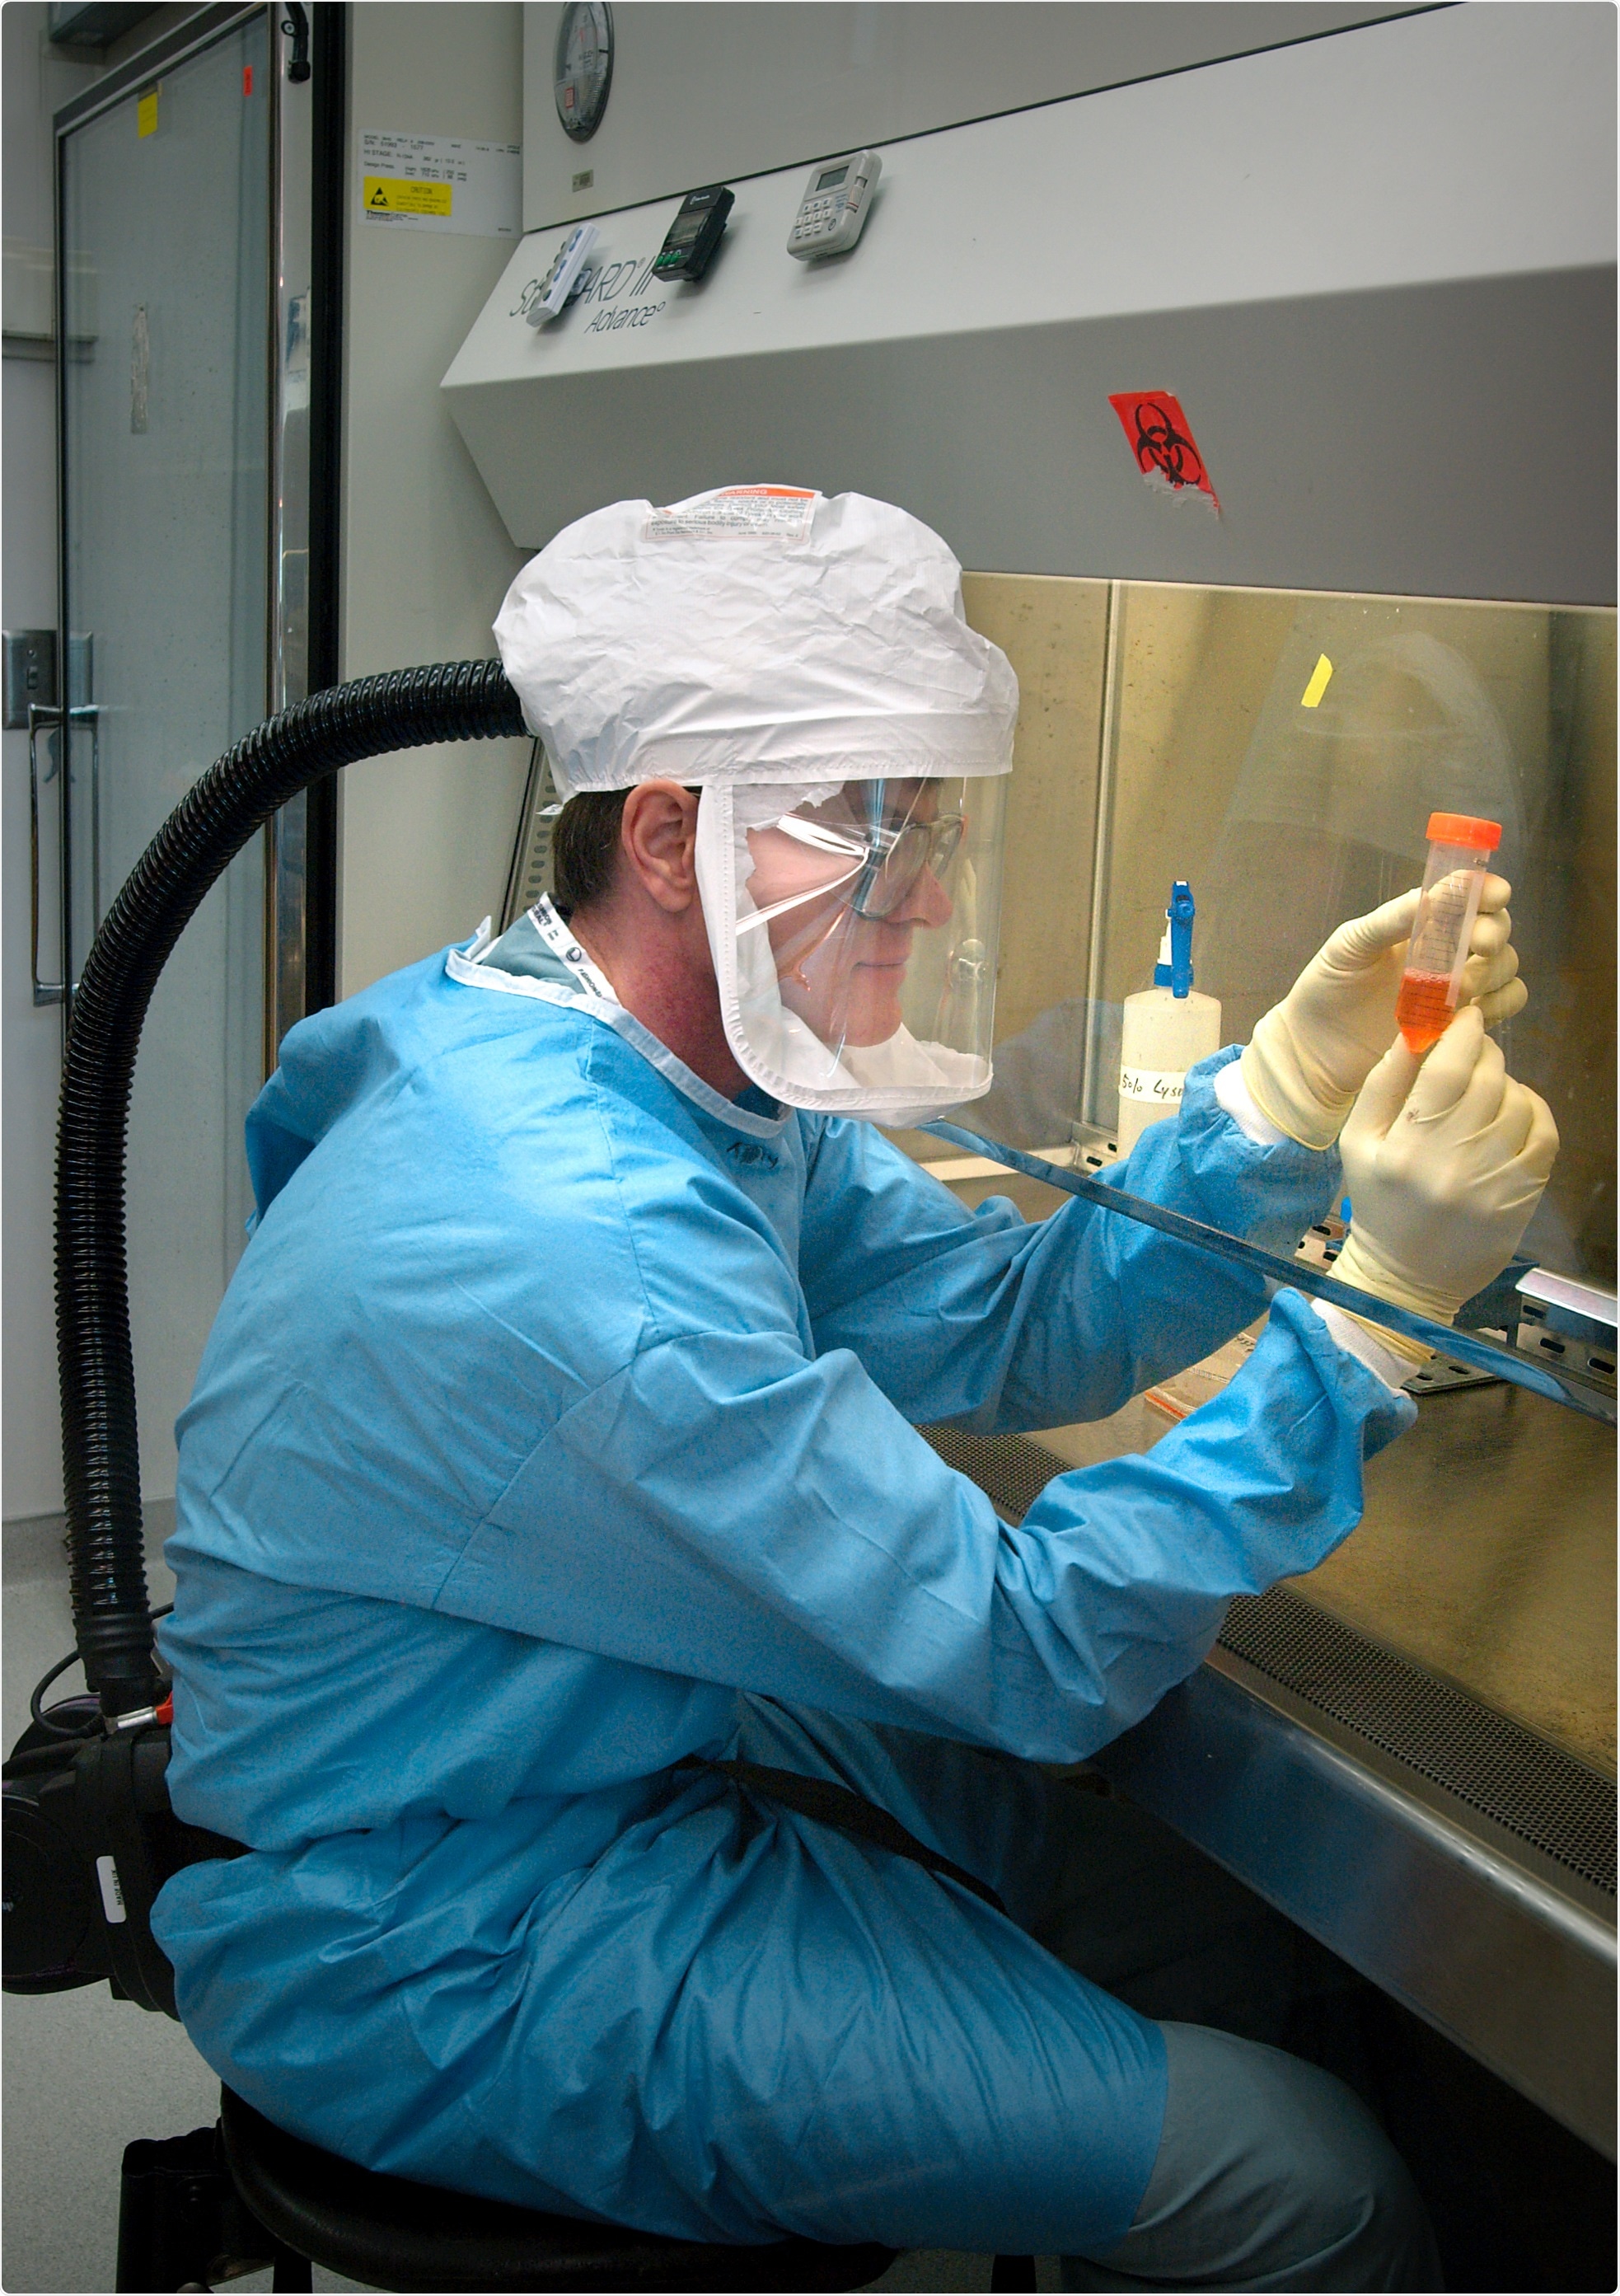 Researcher at US Centers for Disease Control, Atlanta, Georgia, working with influenza virus under biosafety level 3 conditions, with respirator inside a biosafety cabinet (BSC). Photo Credit: James Gathany Content Providers(s): CDC